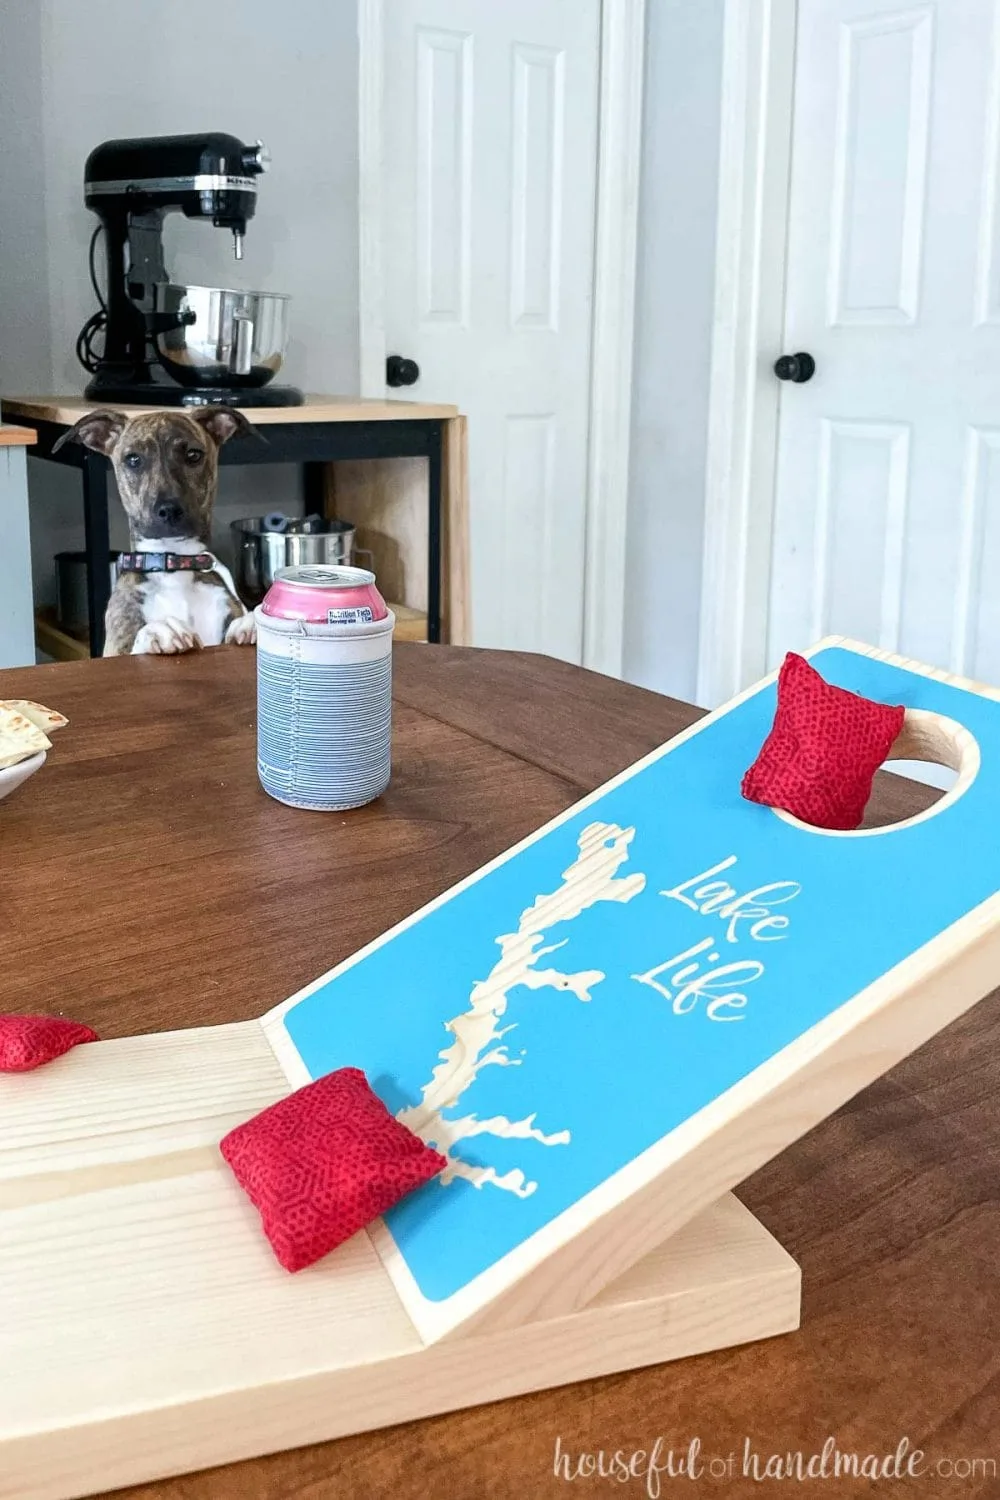 Close up of the one side of the miniature cornhole board on a table with red bean bags on the board and a puppy looking at it in the background.